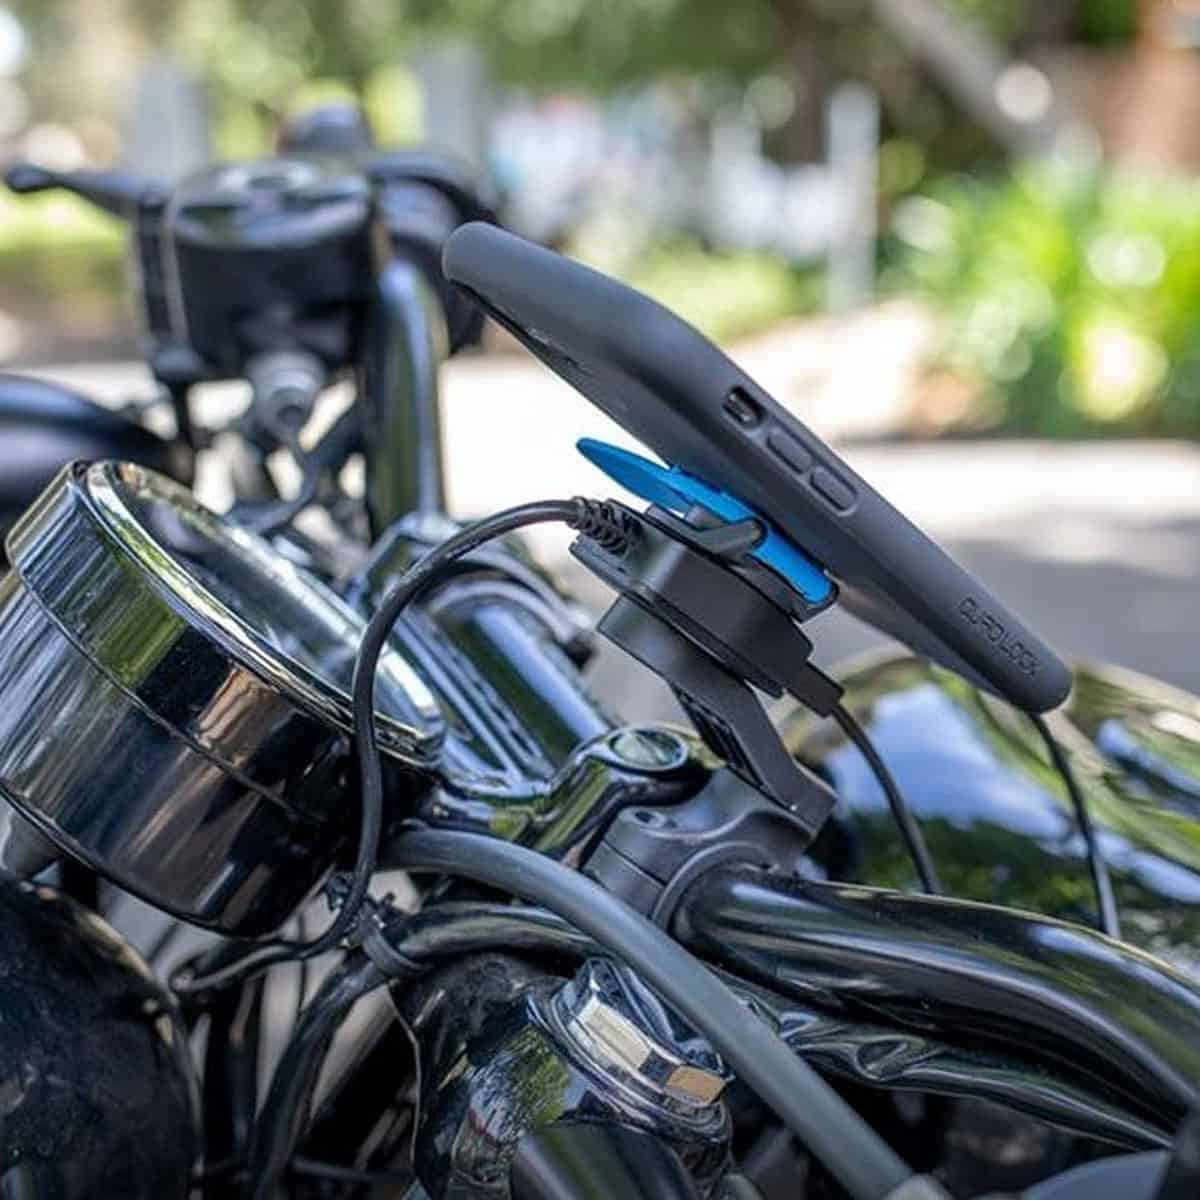 Quad Lock Motorcycle USB Charging Outlet fitted to motorcycle